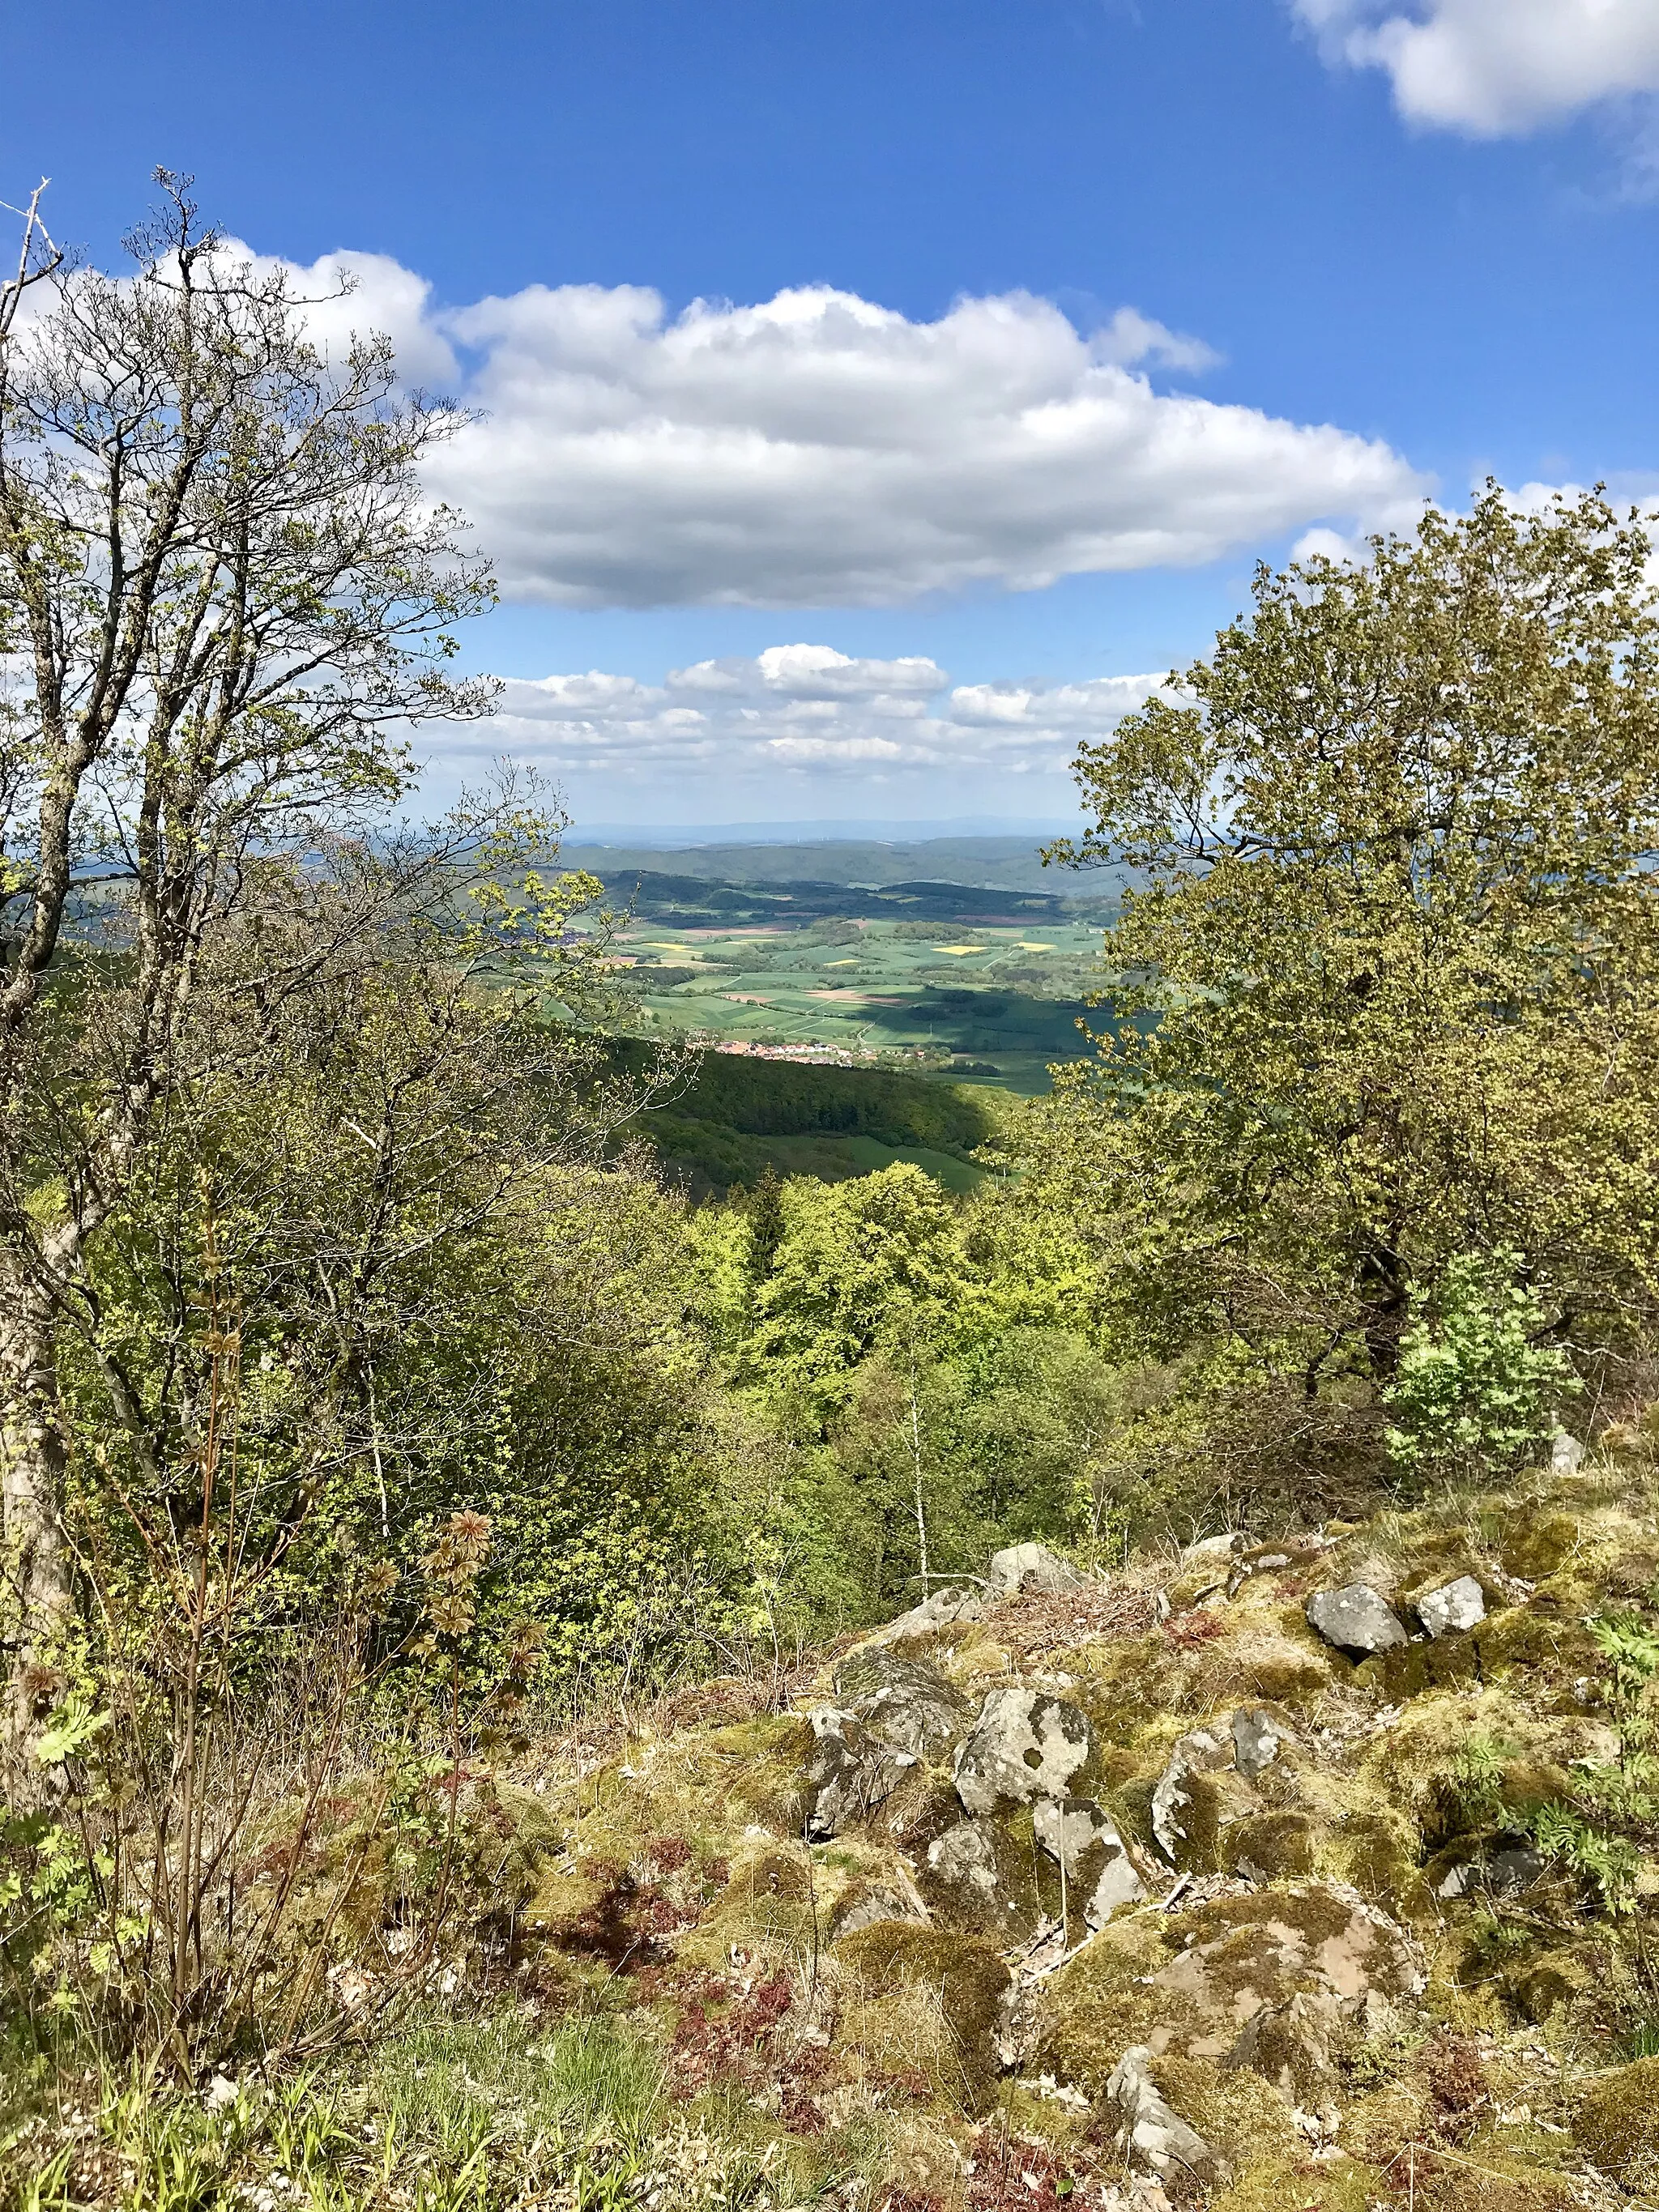 Photo showing: View from the mountain nature park Hoher Meißner near Kassel, Germany